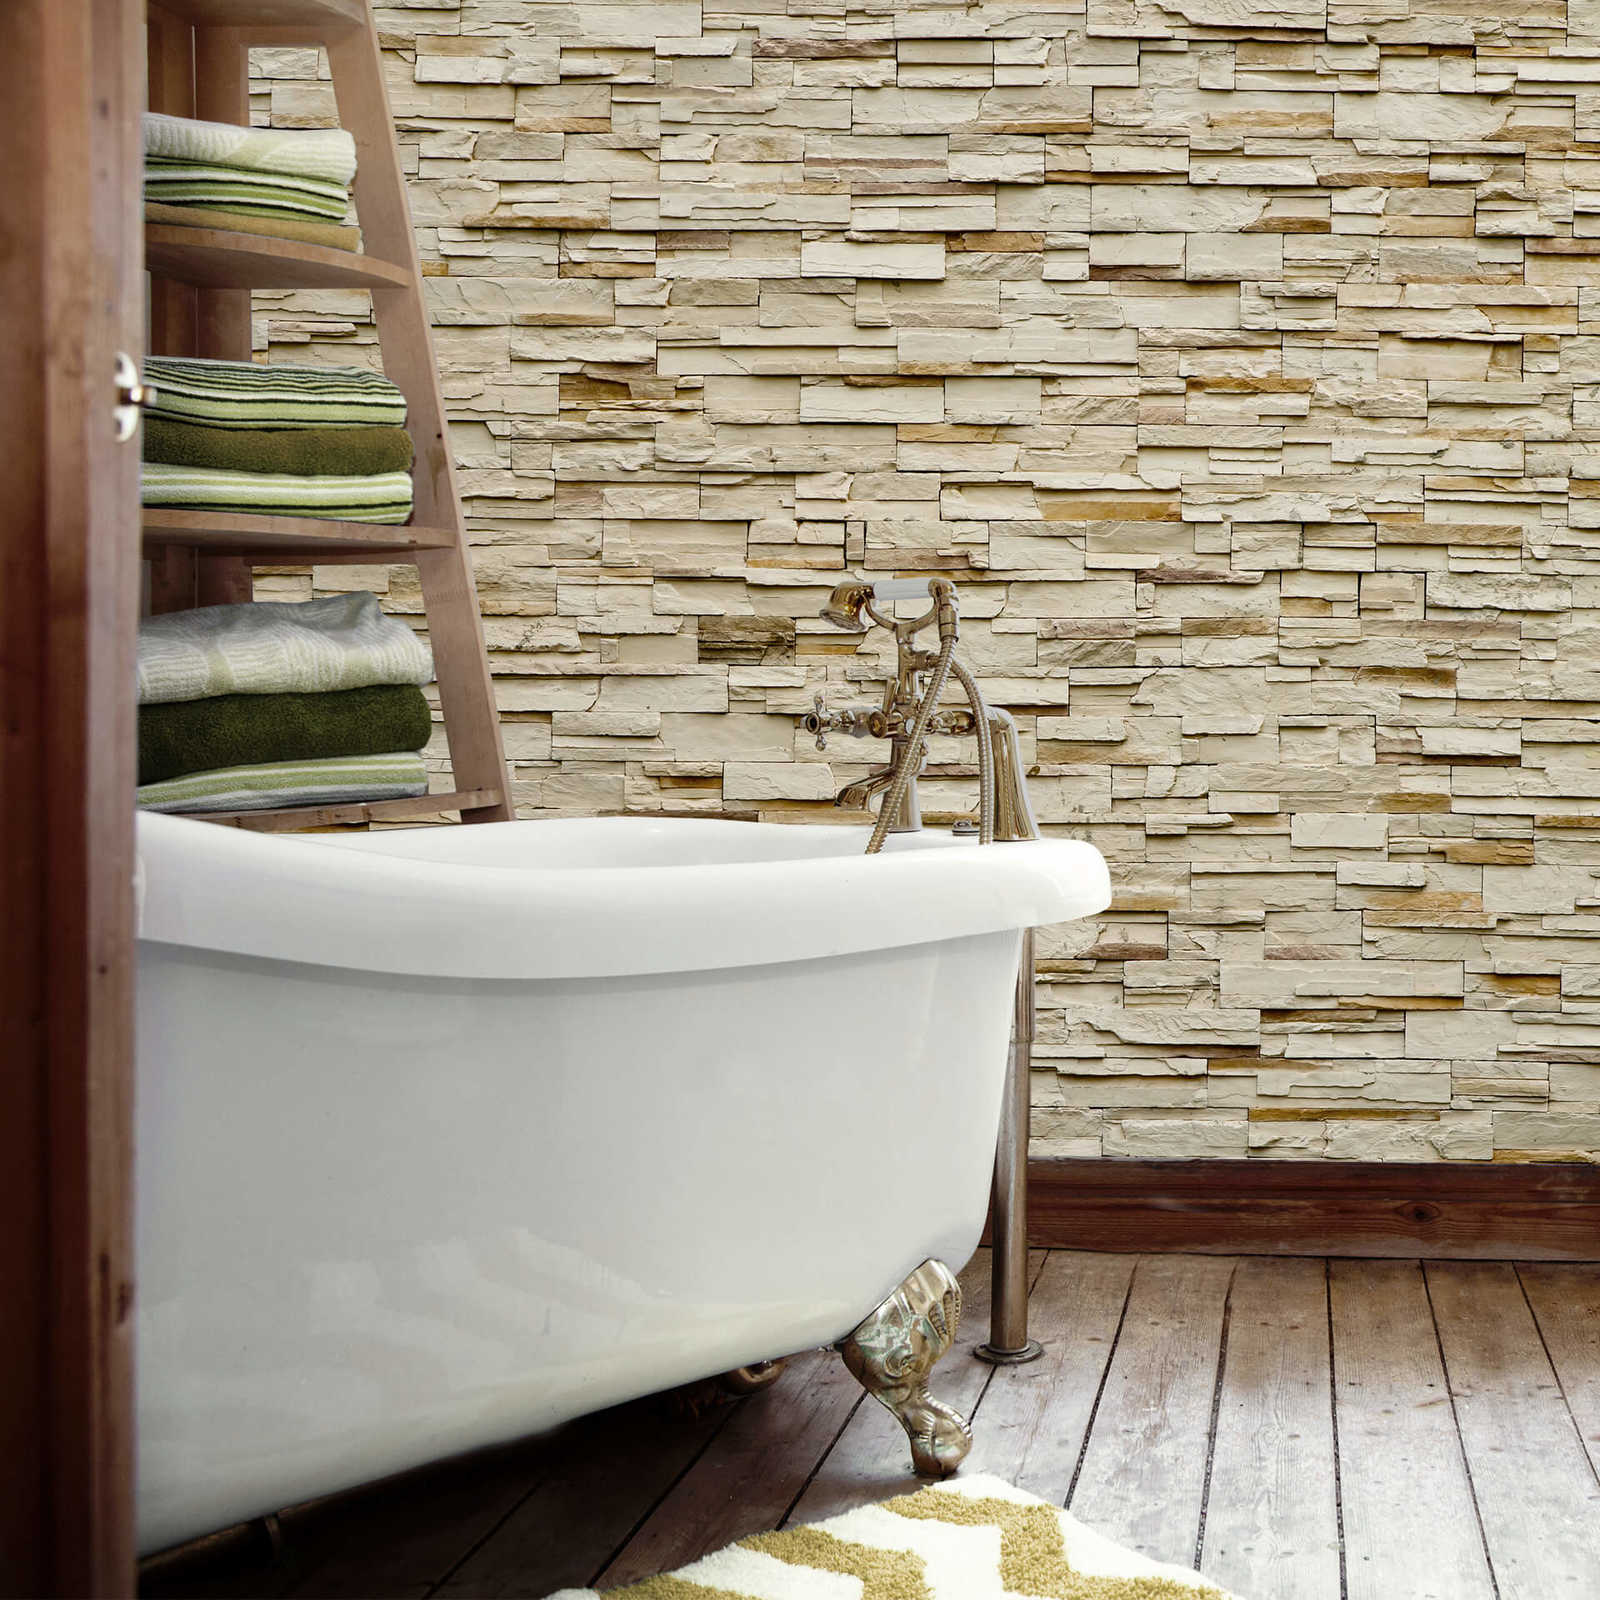             Photo wallpaper nature stone wall look - beige
        